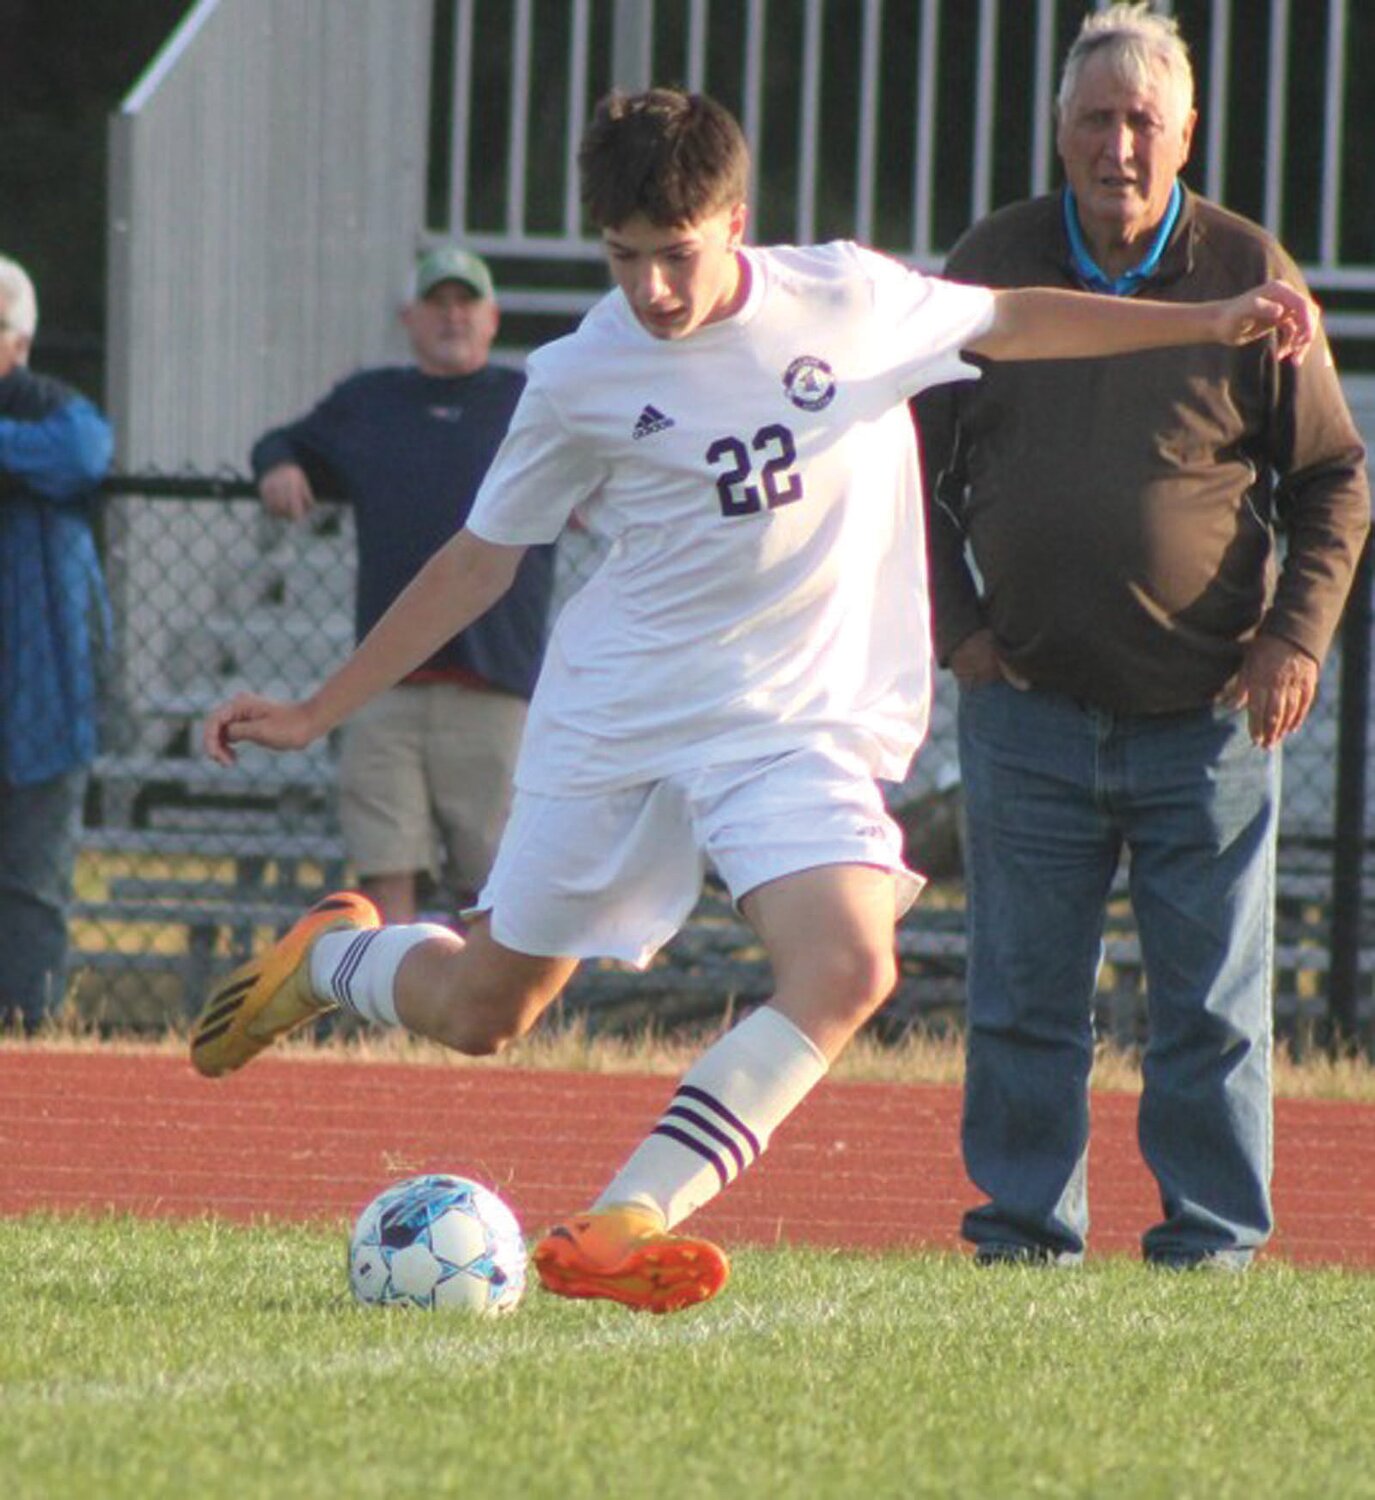 UP THE FIELD: Pilgrim’s Jonathan Lopes gives the ball a boot. (Photos by Alex Sponseller)